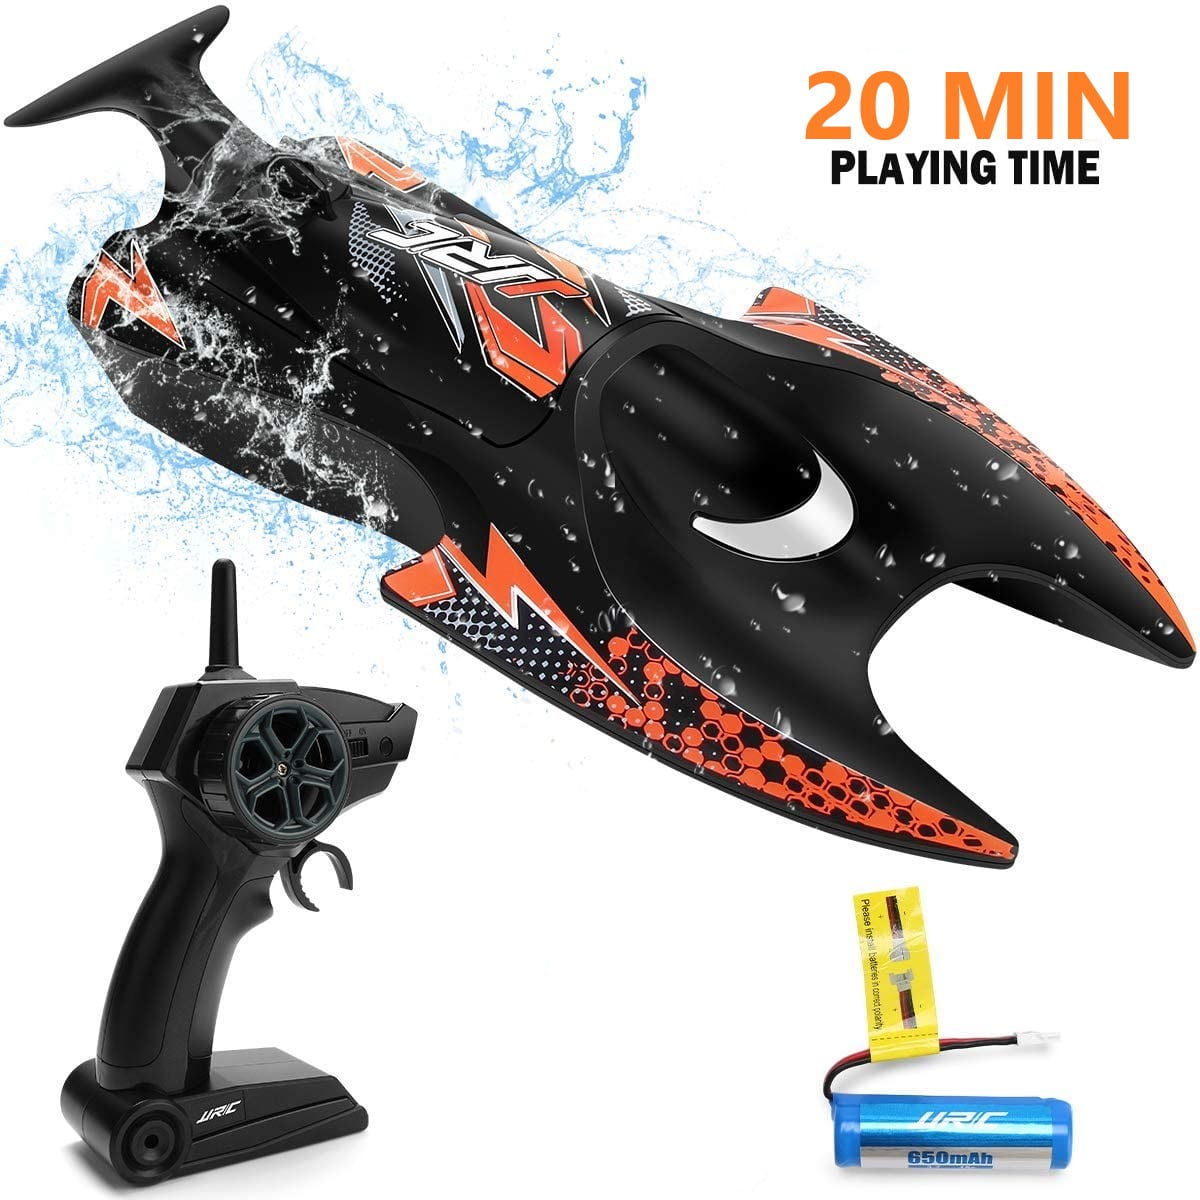 JJRC RC Boat Remote Controls Boats for Pools Lakes Salt Water Outdoor,  15km/h High Speed Mini RC Boat Toys with LED Lights for Kids Adults Boys  Girls Orange 